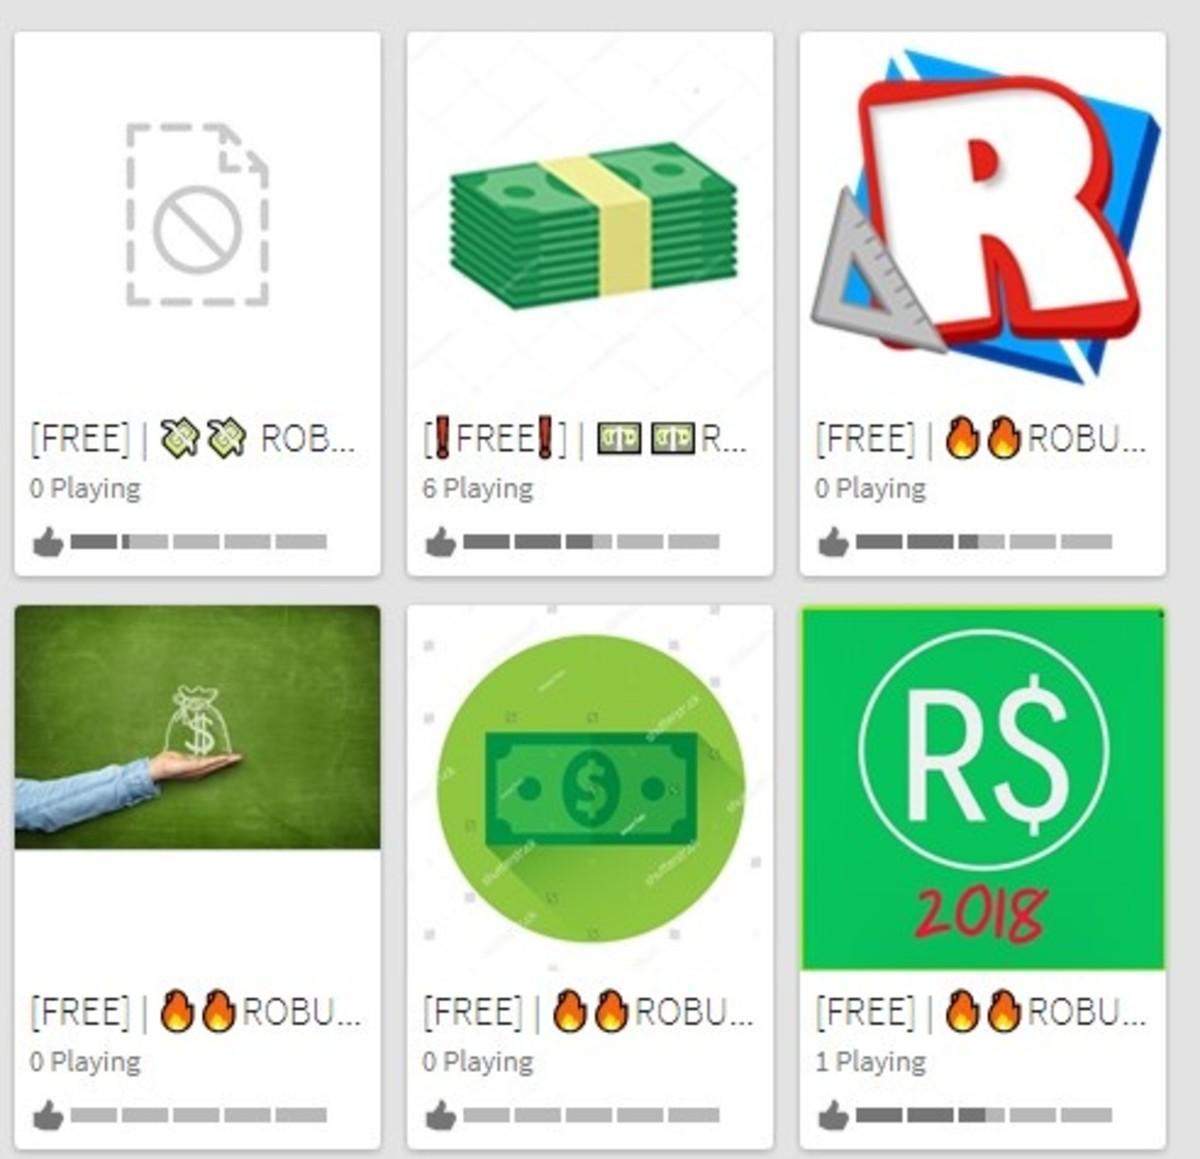 avoid-free-robux-scams